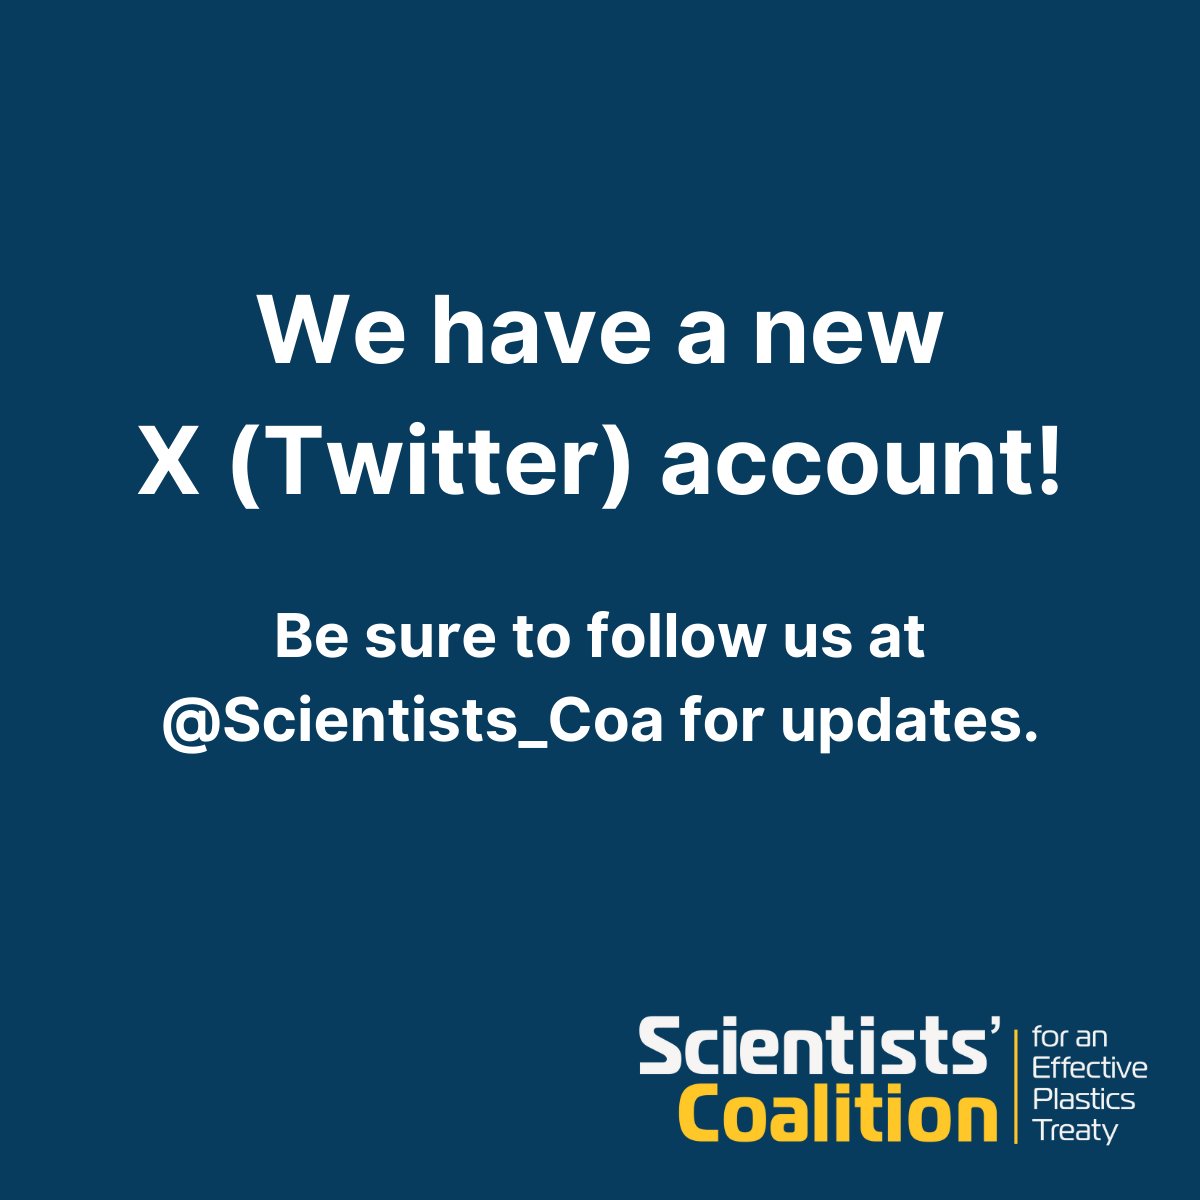 🙌 Introducing our new account here on X! Please update your subscription to follow us here for updates from the Coalition. Our old account @ScientistsCoa is still online but no longer being maintained.